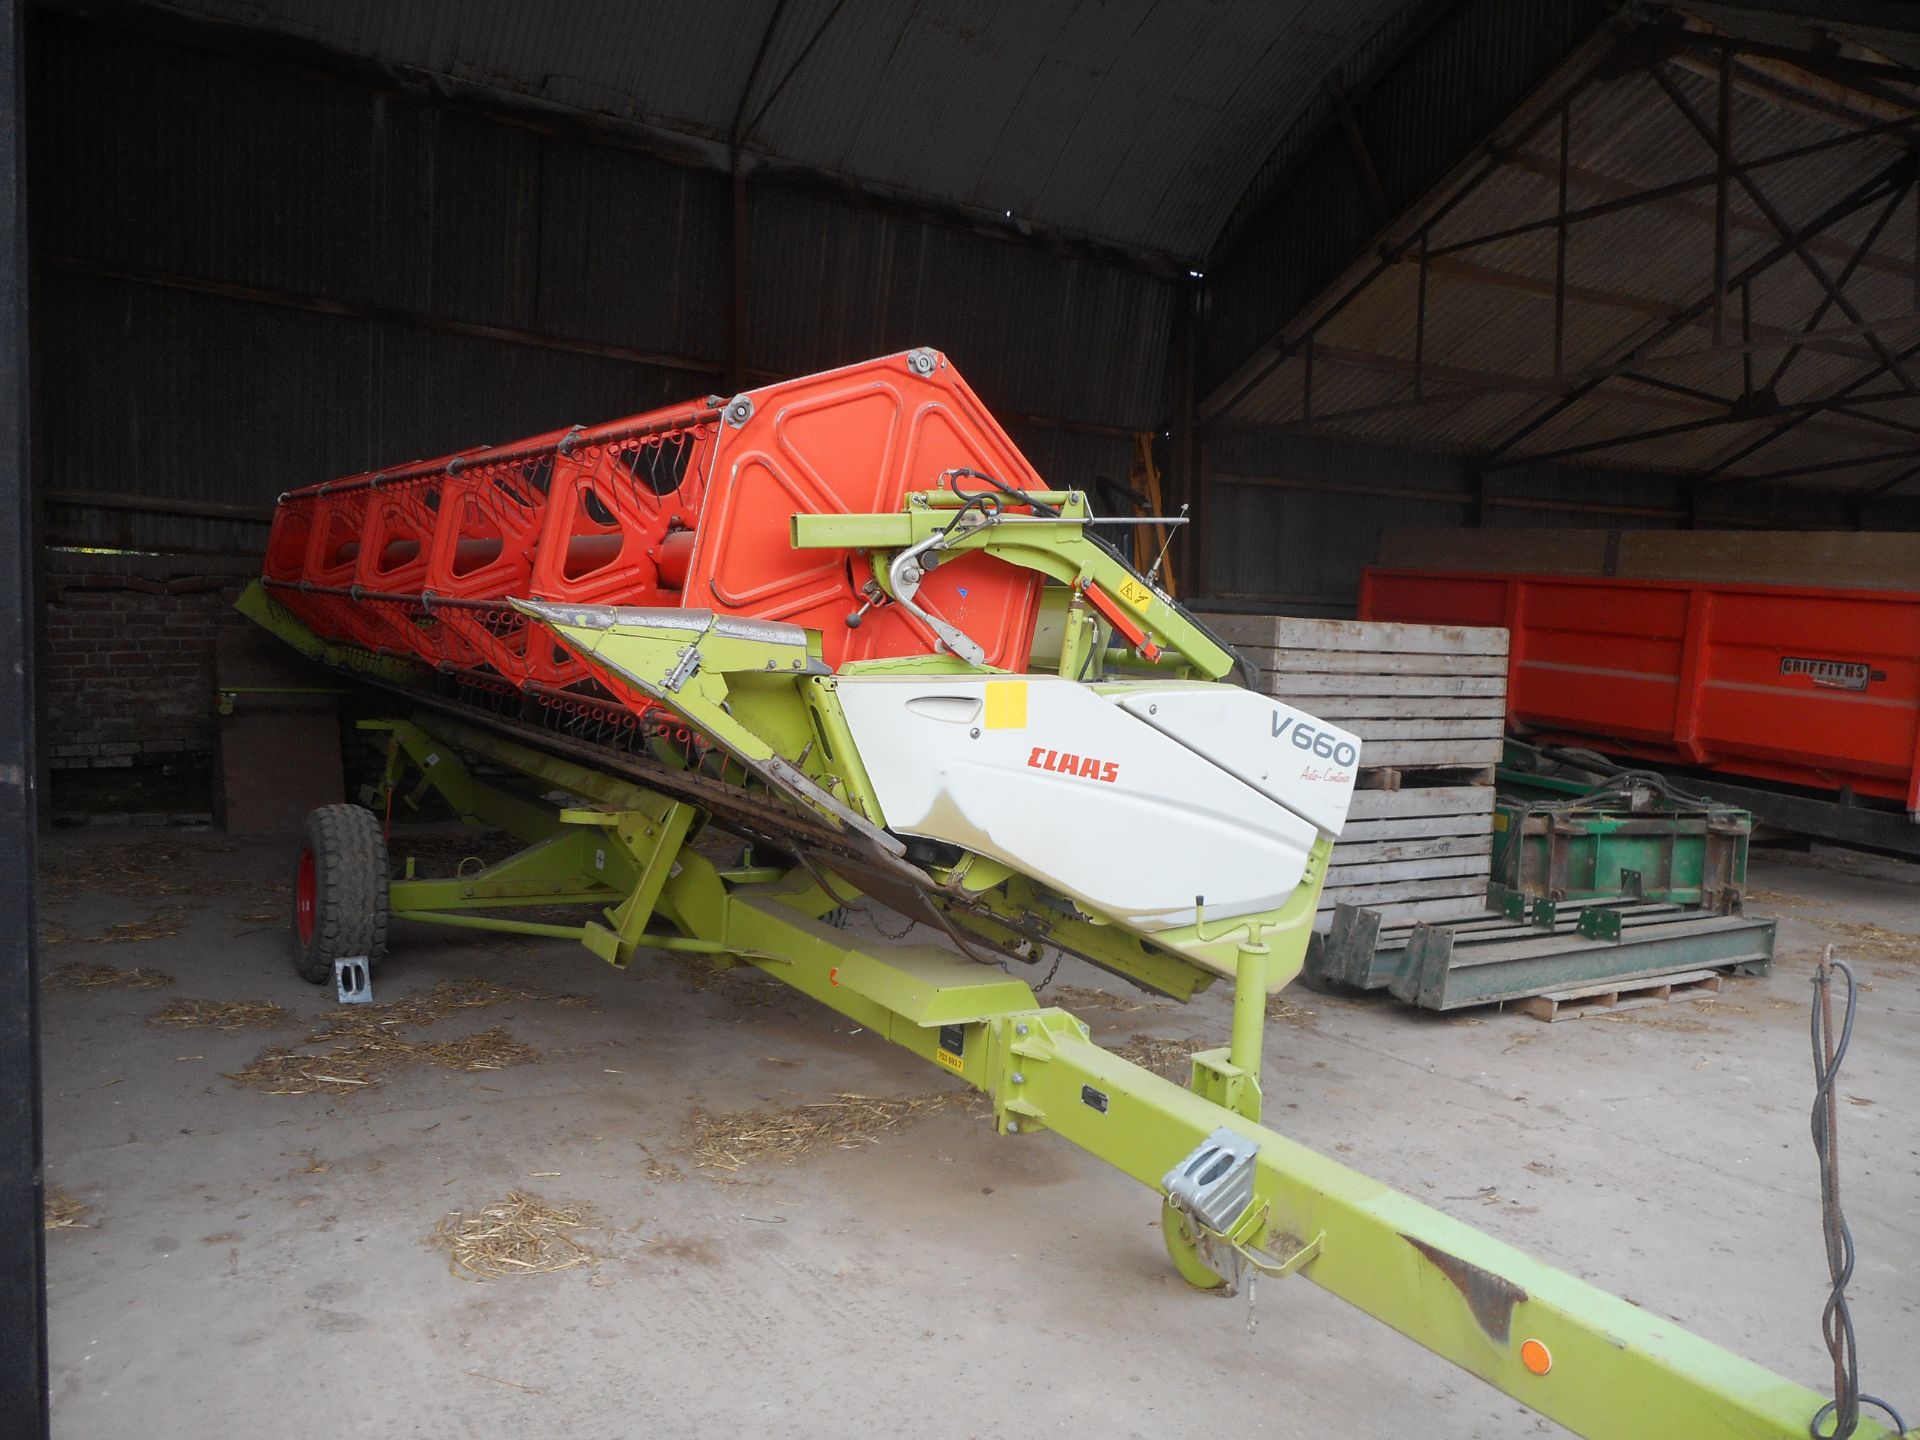 CLASS 440 TUCANO COMBINE HARVESTER REG DX09 HYU 22FT CUT, BED TRAILER 1050 DRUM HOURS FIRST REG 01/ - Image 3 of 6